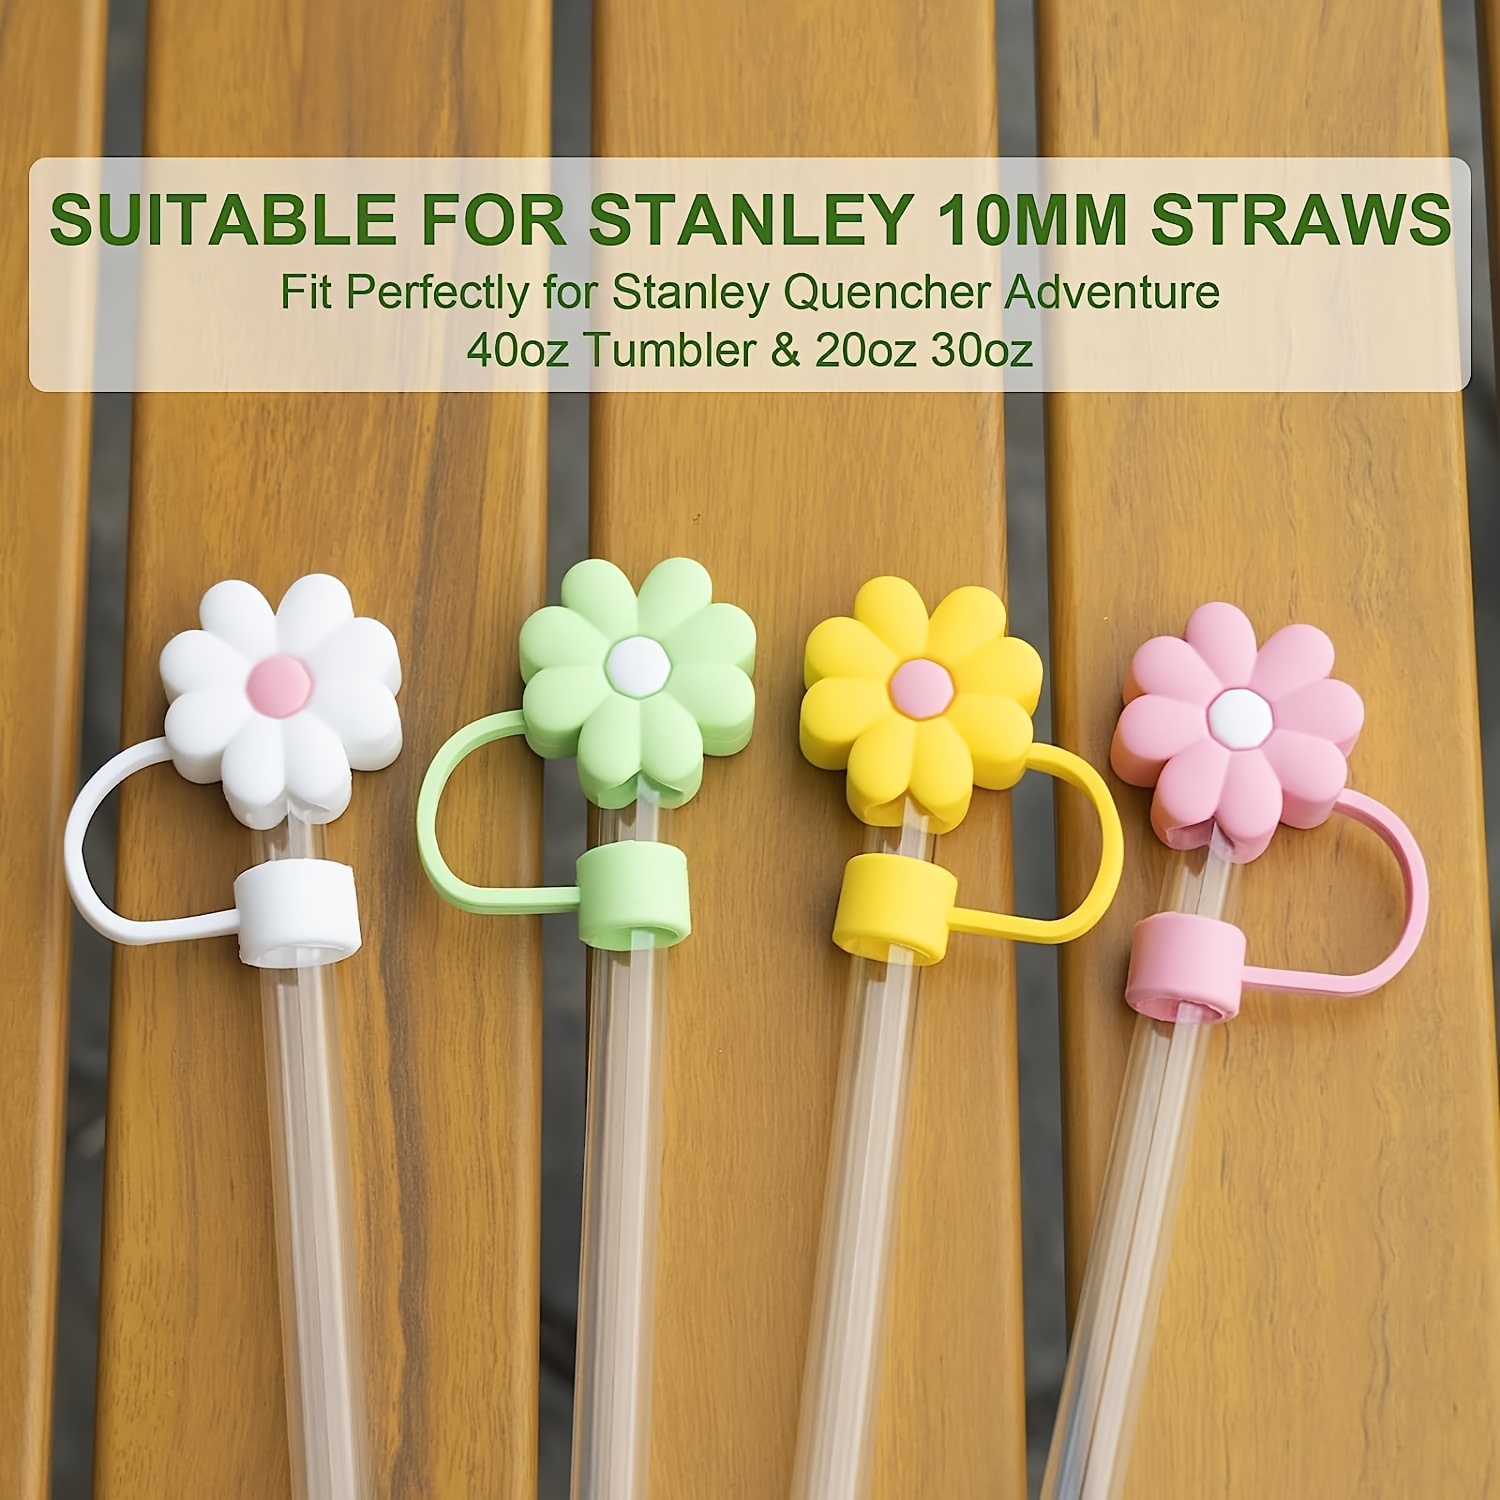 Halloween Straw Cap Toppers for Stanley Straws, Stanley Quencher